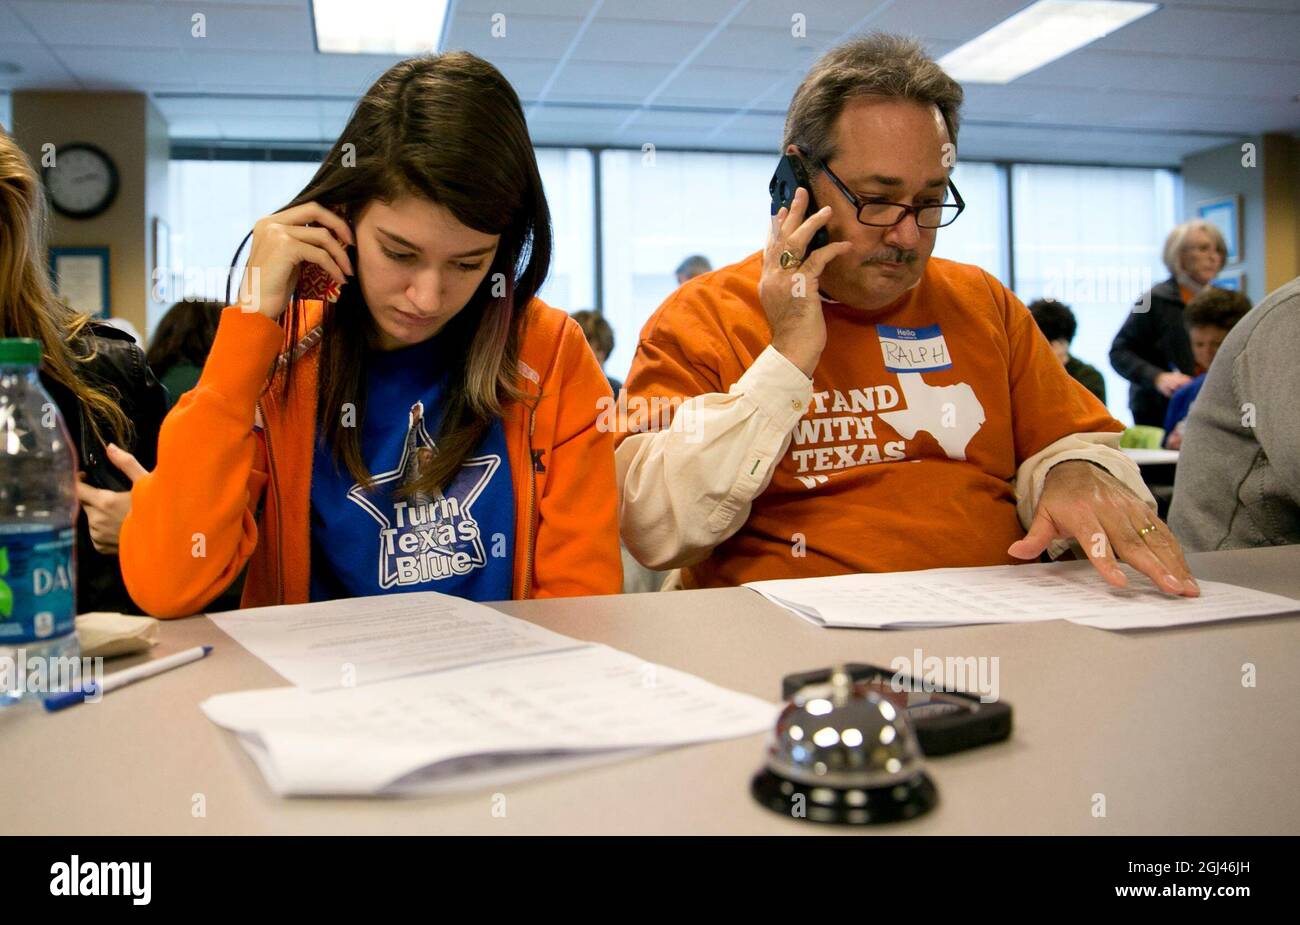 Austin, Texas, USA. 23rd Nov, 2013. Volunteers for Battleground Texas and the state Democratic Party at a phone bank on November 23rd, 2013 making calls to potential voters. Battleground Texas formed in 2013 is attempting to ''turn Texas blue'' for Texas Governor candidate Wendy Davis (not shown) who gained national attention this summer with an 11-hour filibuster of legislation restricting access to abortion. (Credit Image: © Bob Daemmrich/ZUMA Press Wire) Stock Photo